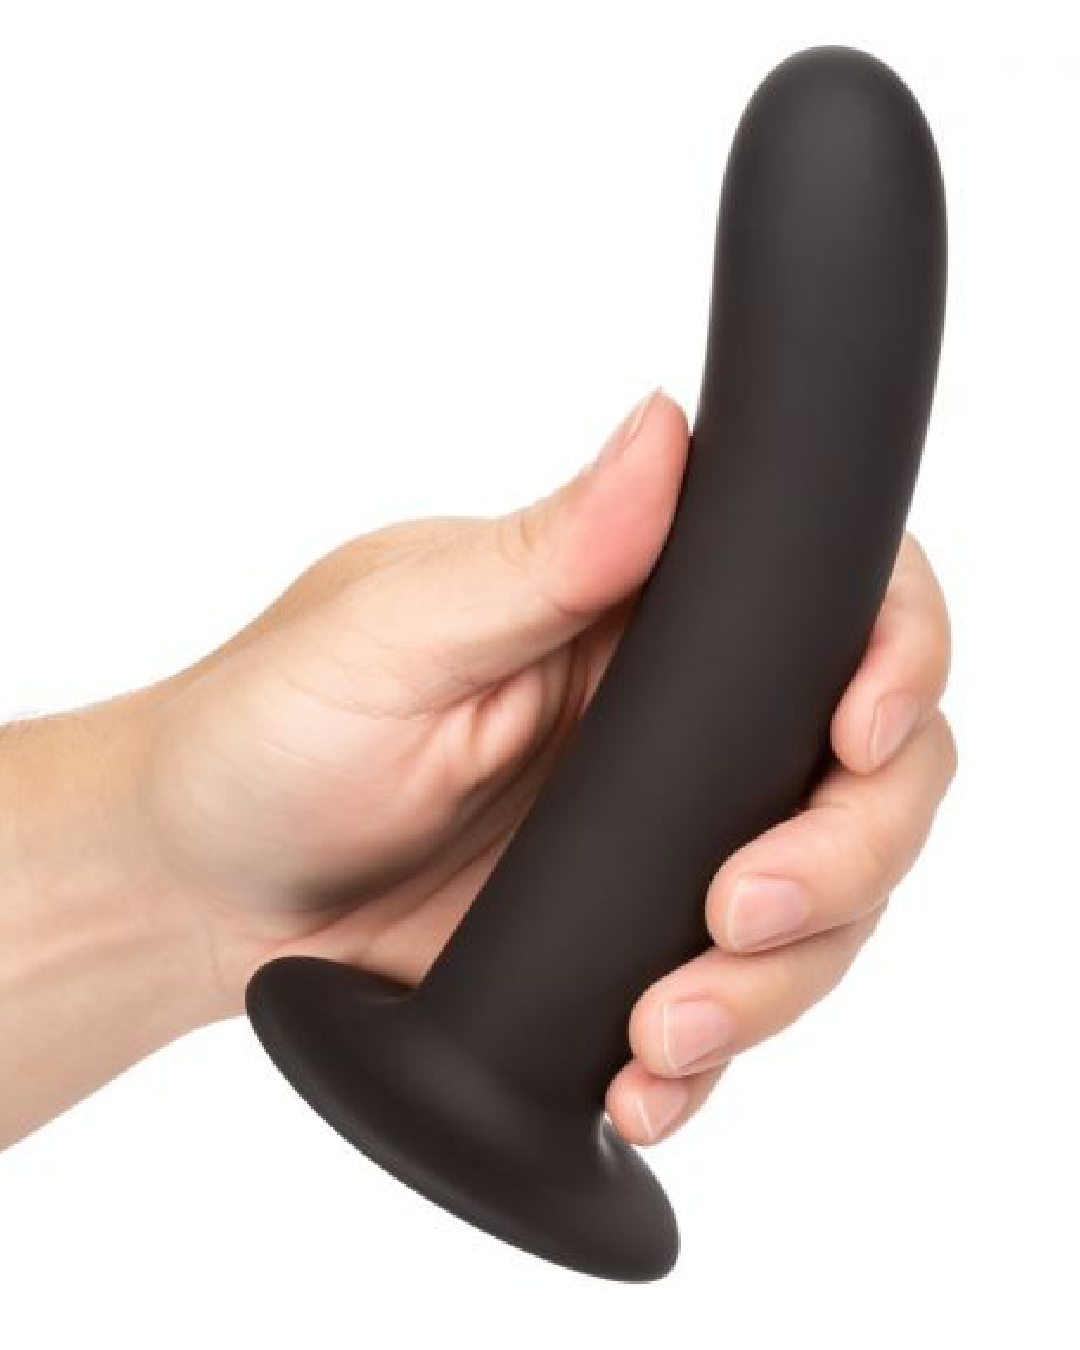 Boundless 7 Inch Smooth Silicone Dildo - Black held in a hand showing the size in a close up